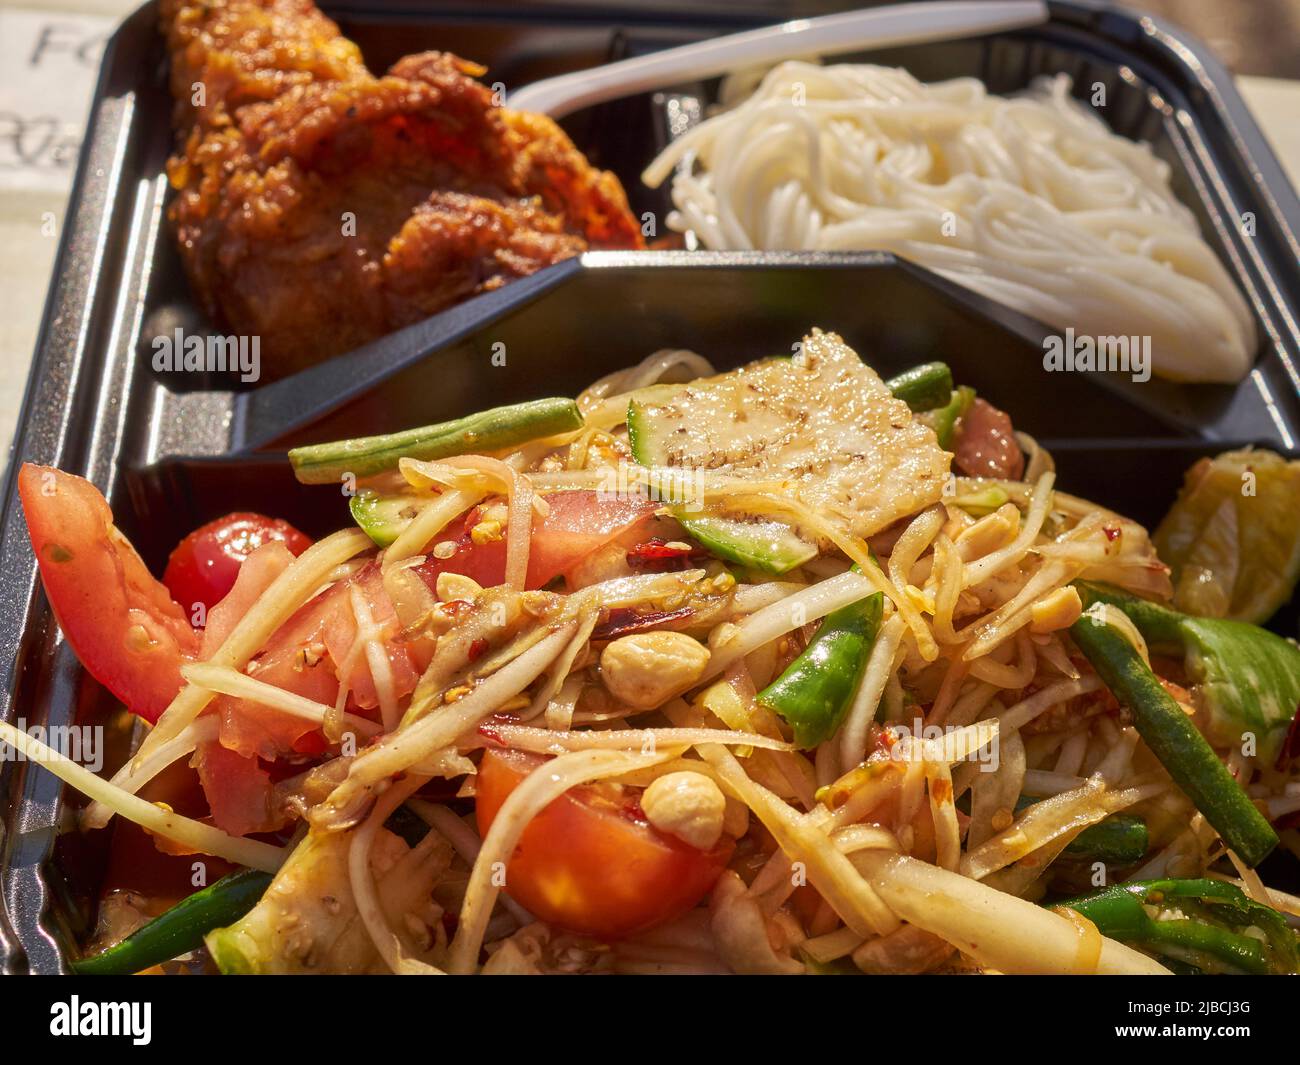 Som tum, noodle and fried chicken platter from a street vendor in Little Thailand, Queens, New York City, Festival Stock Photo